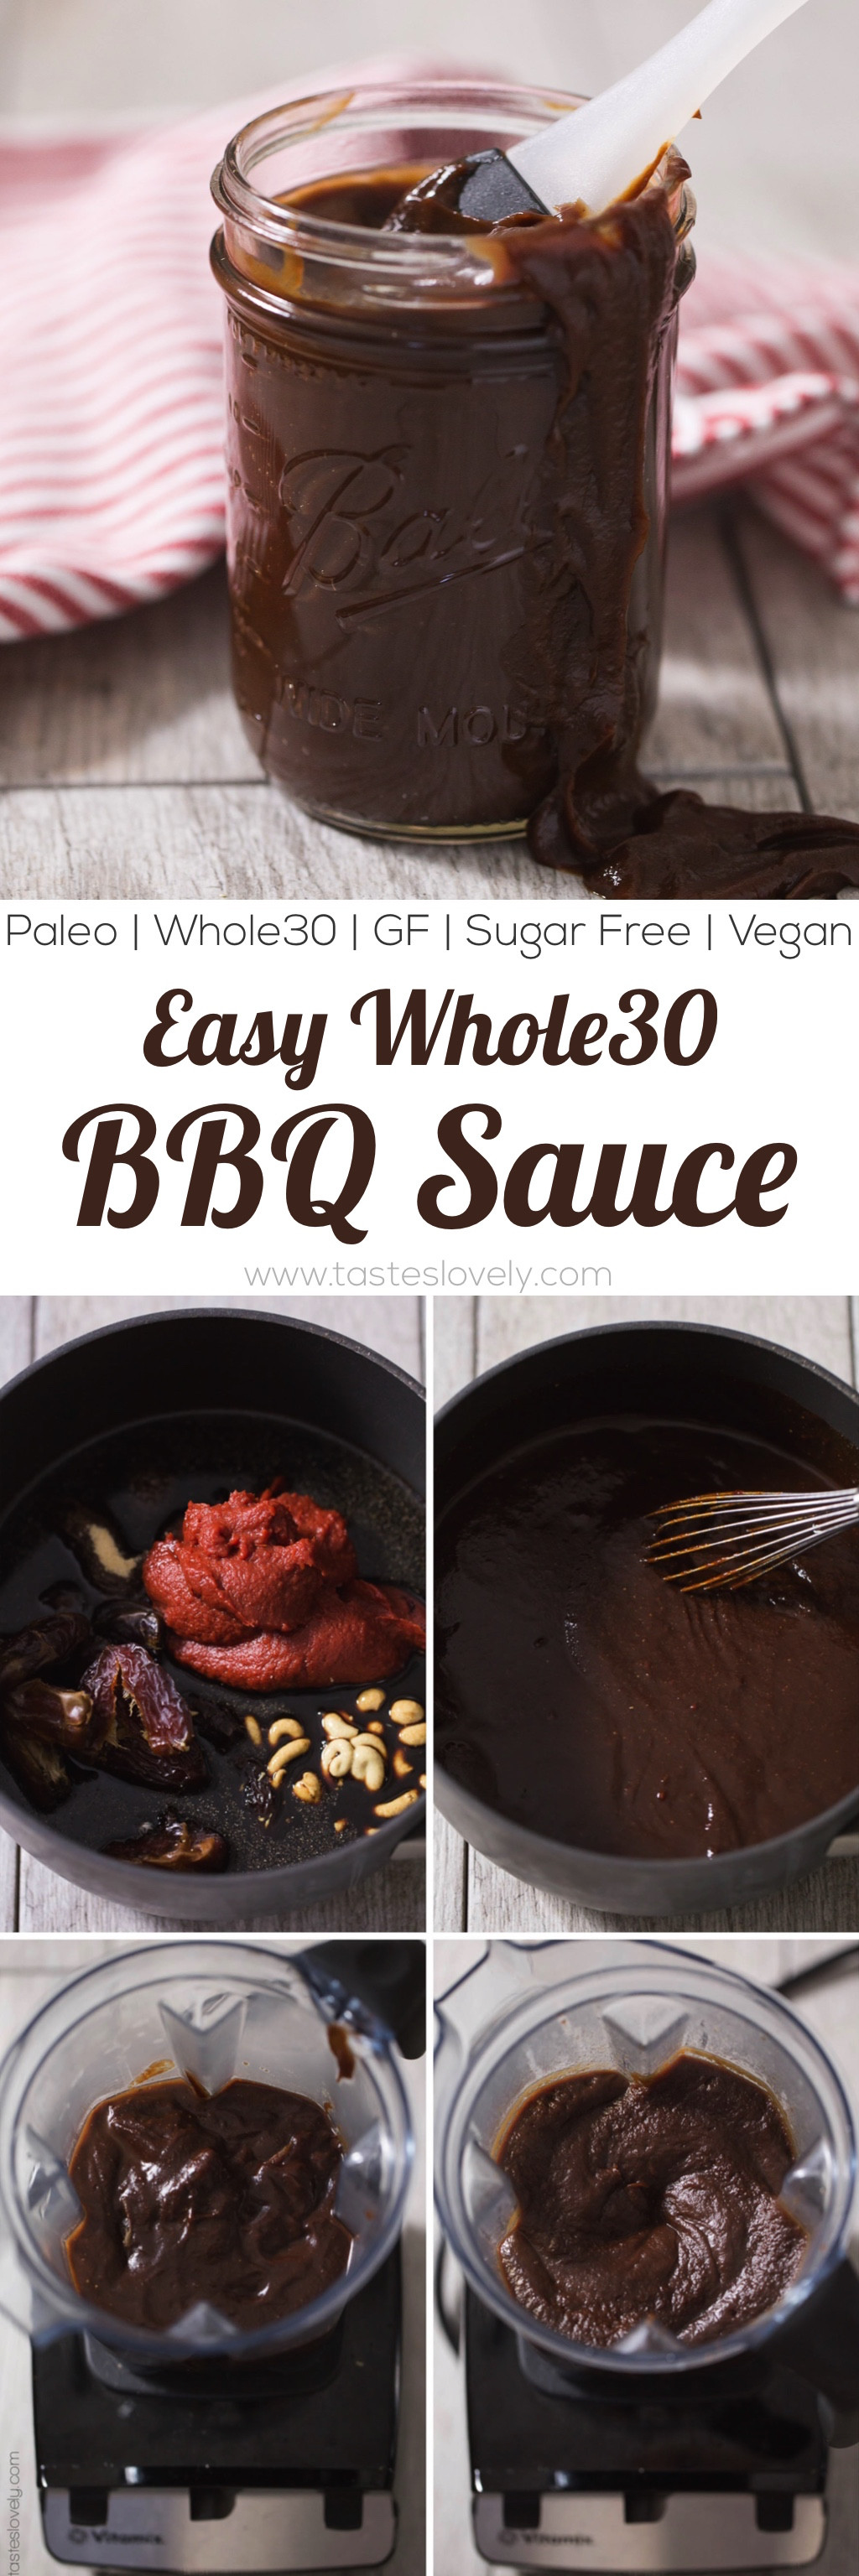 Whole30 Bbq Sauce Recipe
 Easy Whole30 BBQ Sauce Tessemae s Copycat Tastes Lovely